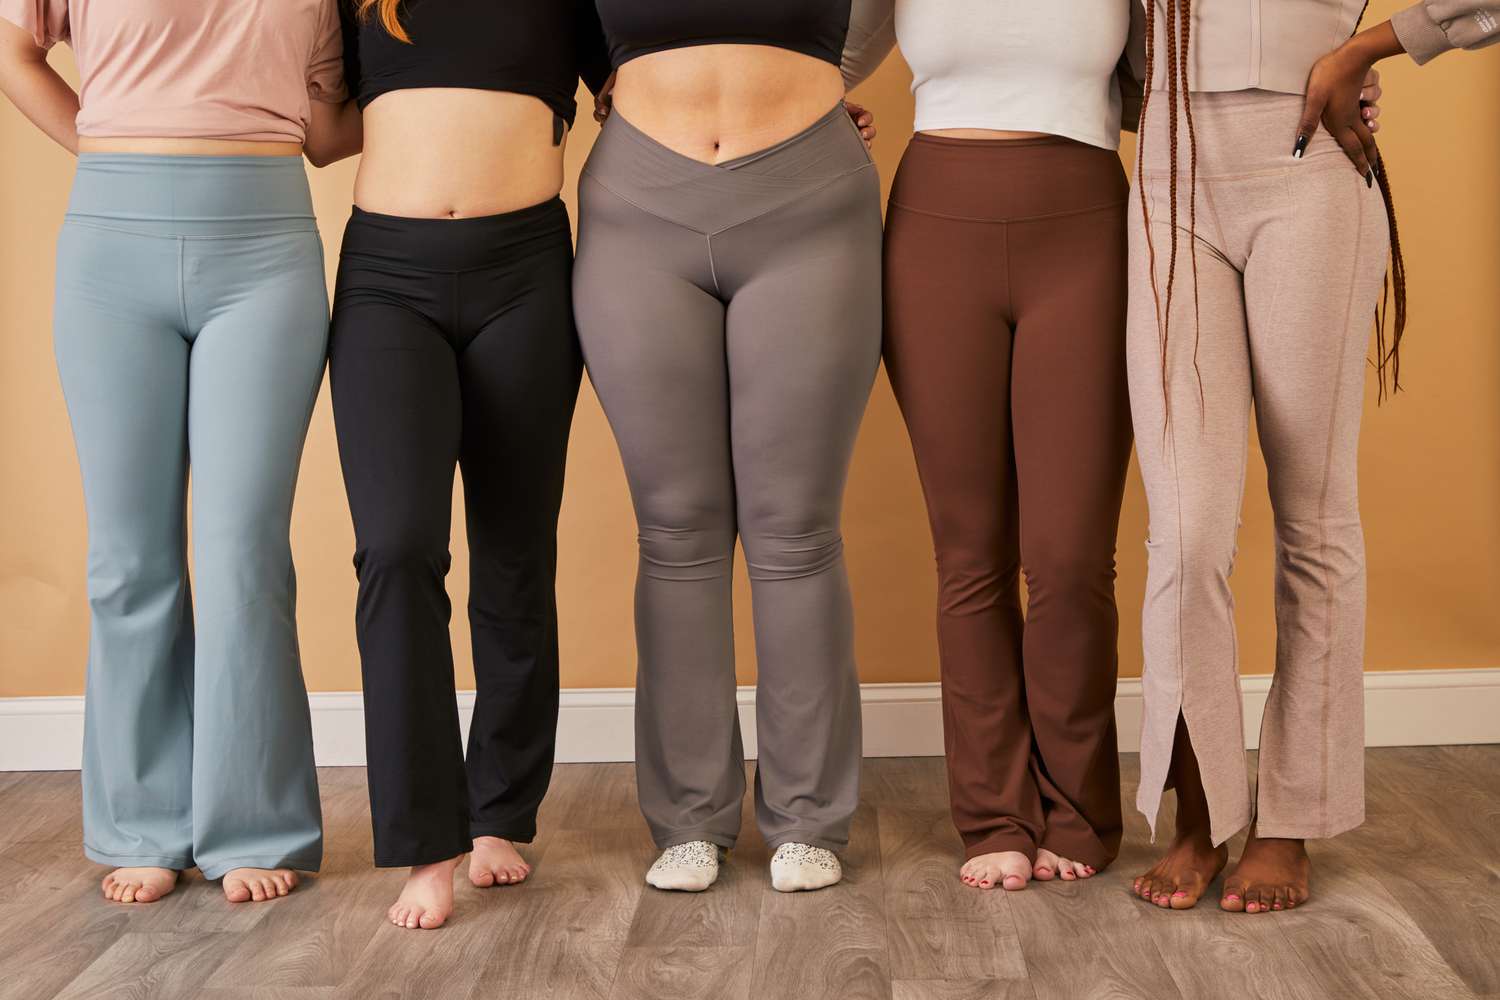 amir mehrani recommends girls in super tight yoga pants pic